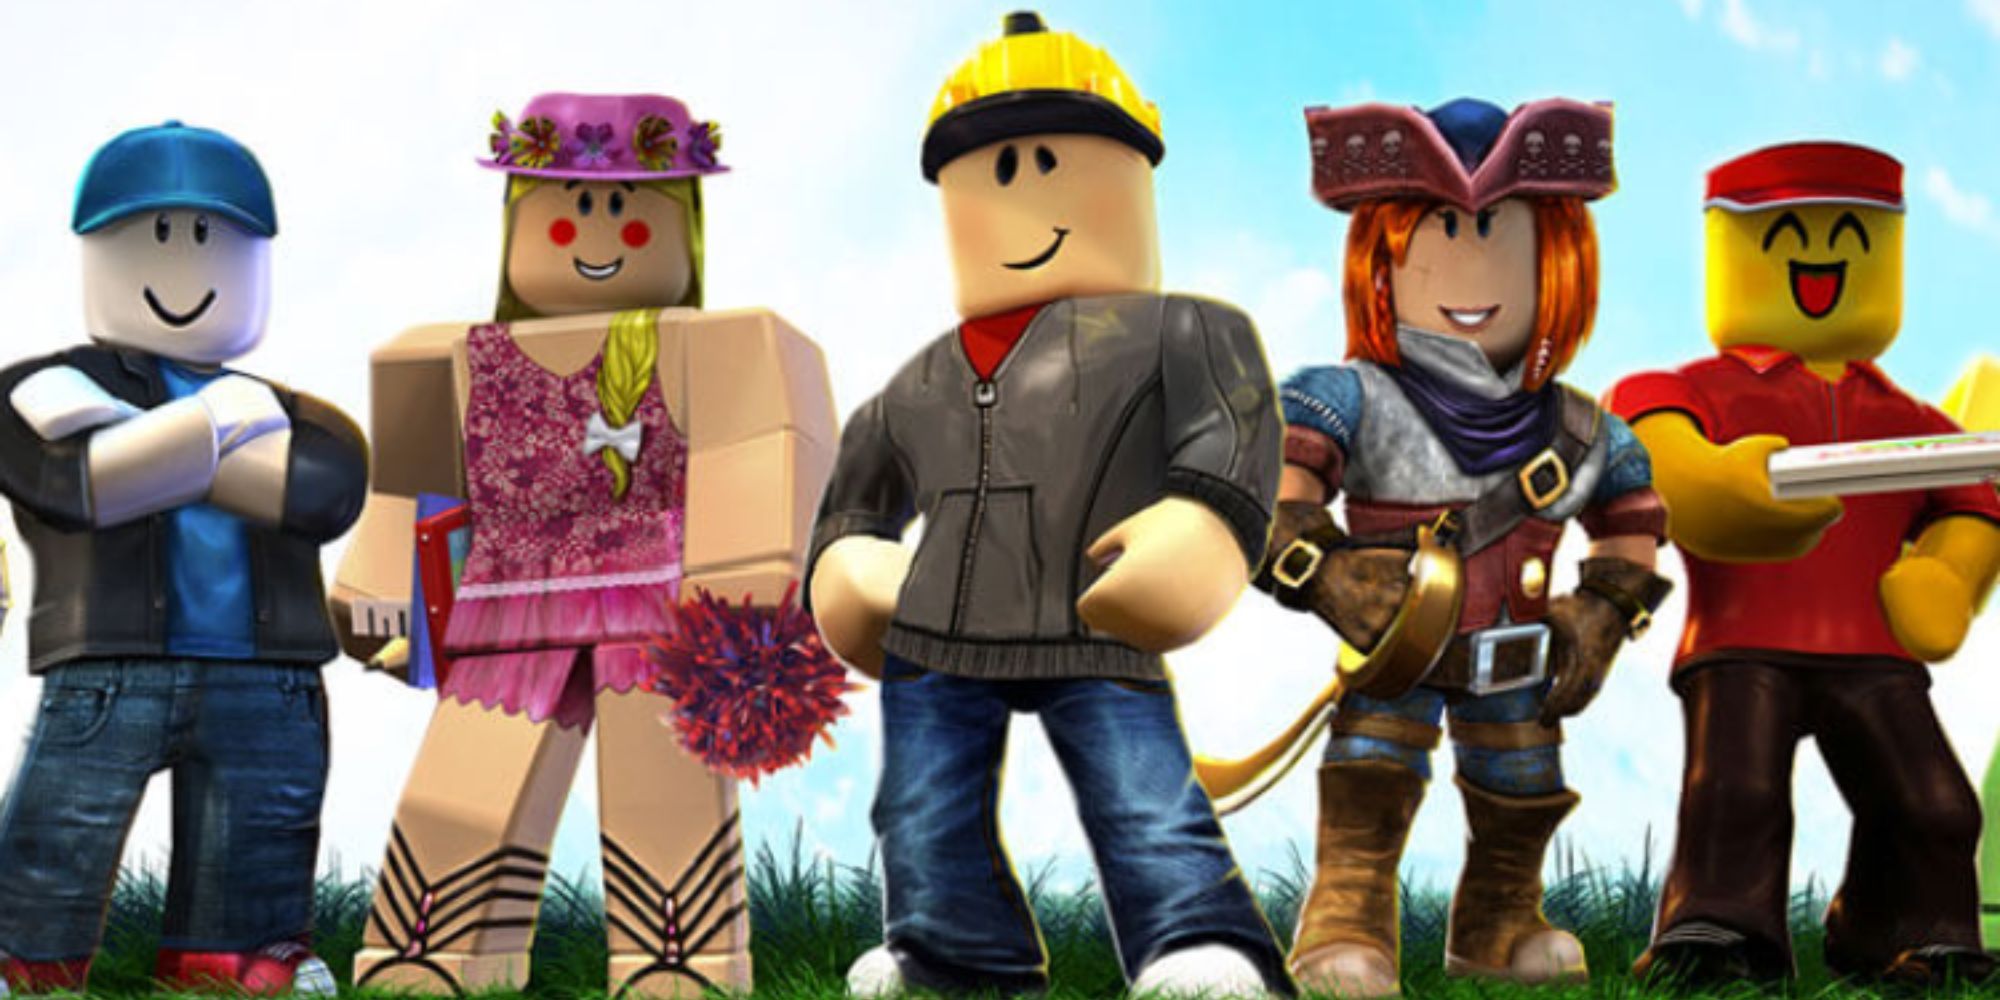 Group Of Roblox Characters Standing Next To Each Other